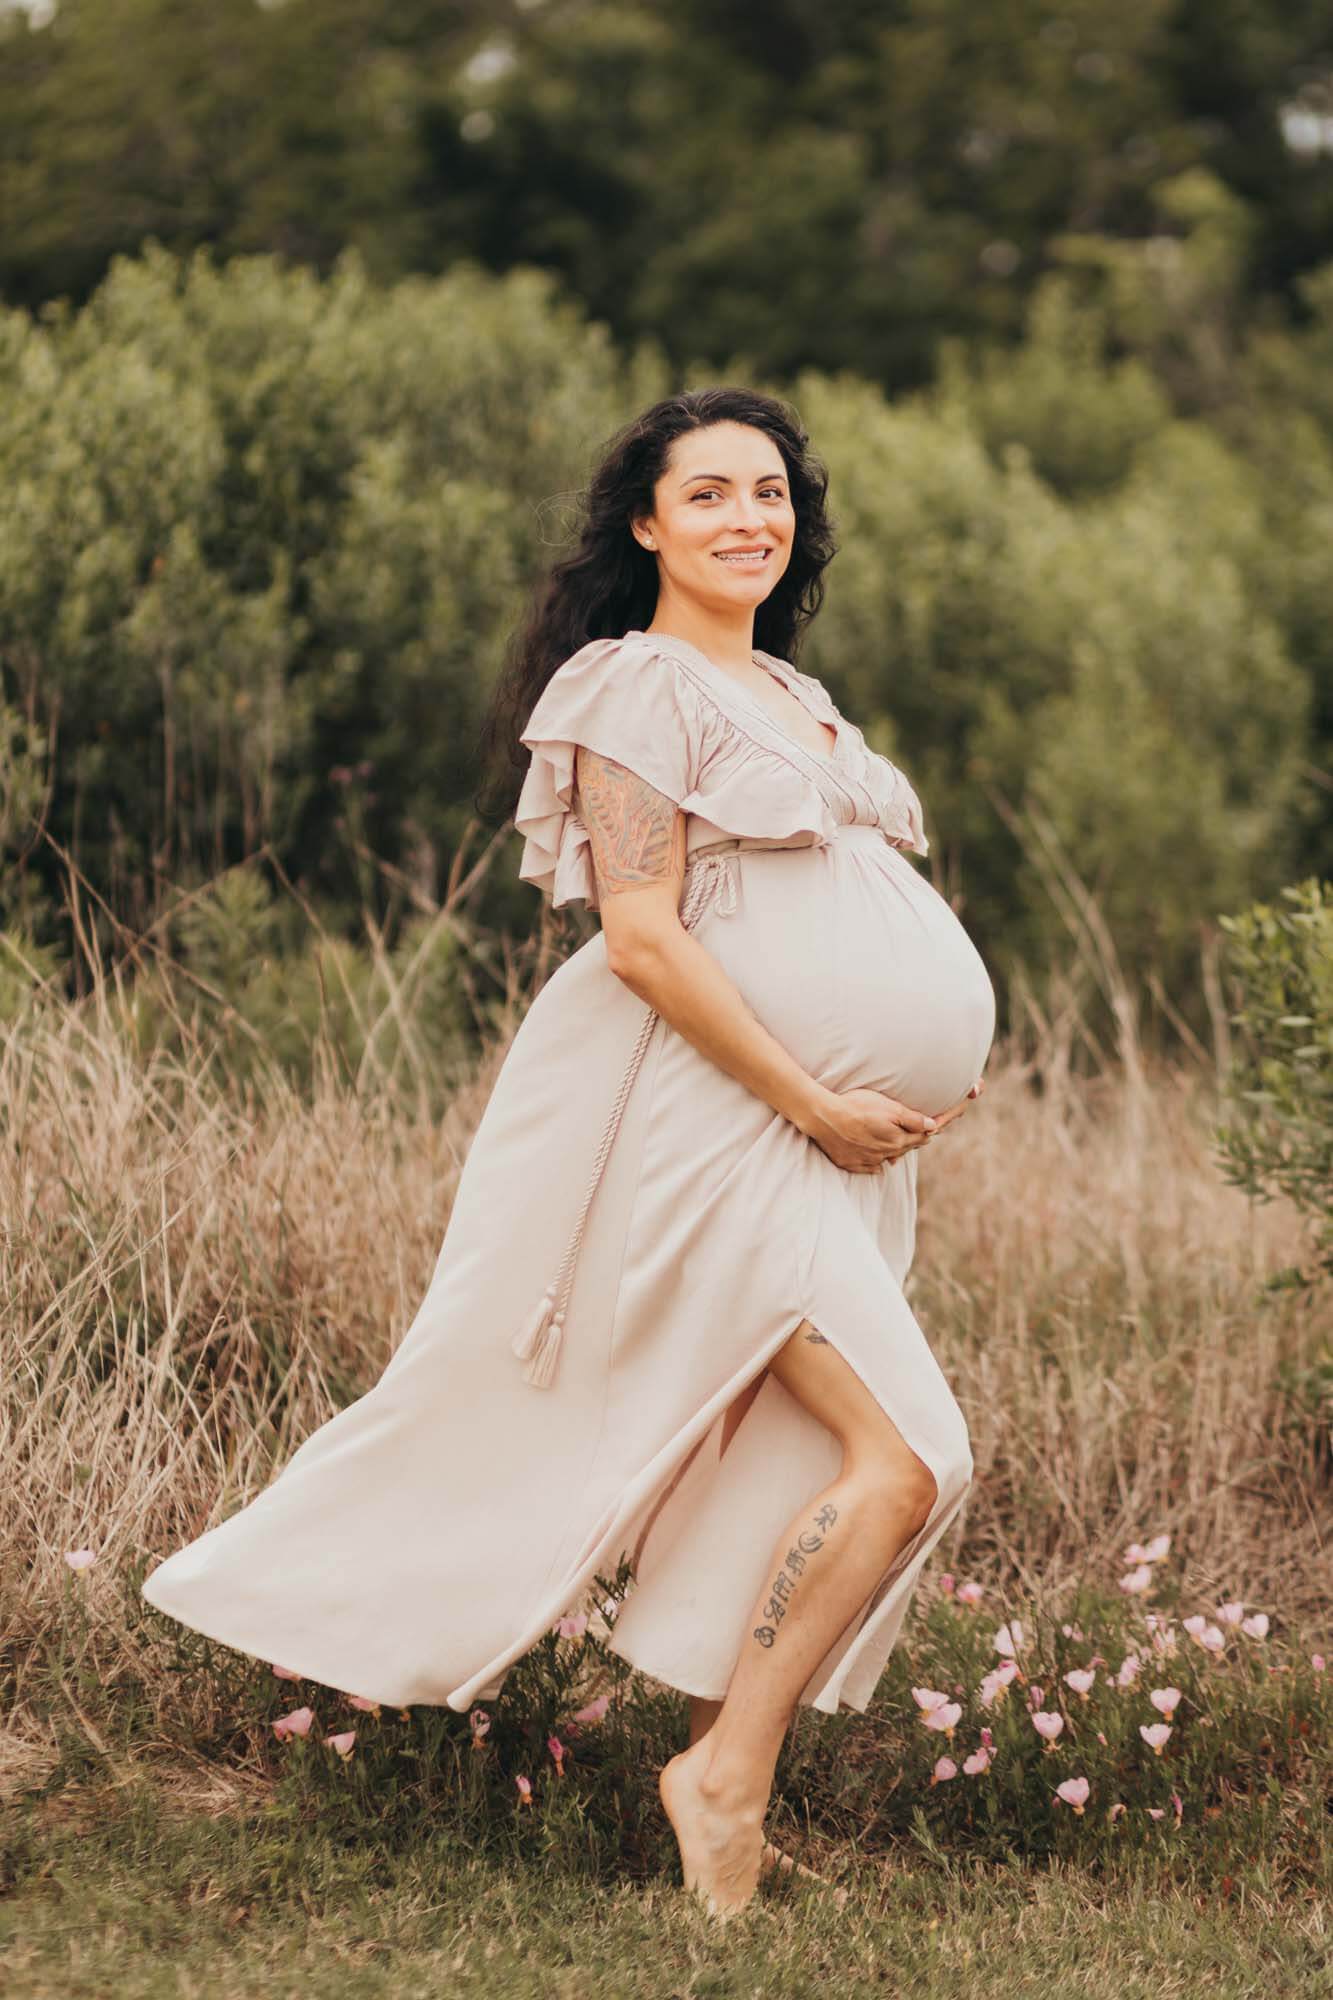 Expectant mom poses for Ally's Photography in Houston, to document her pregnancy journey.